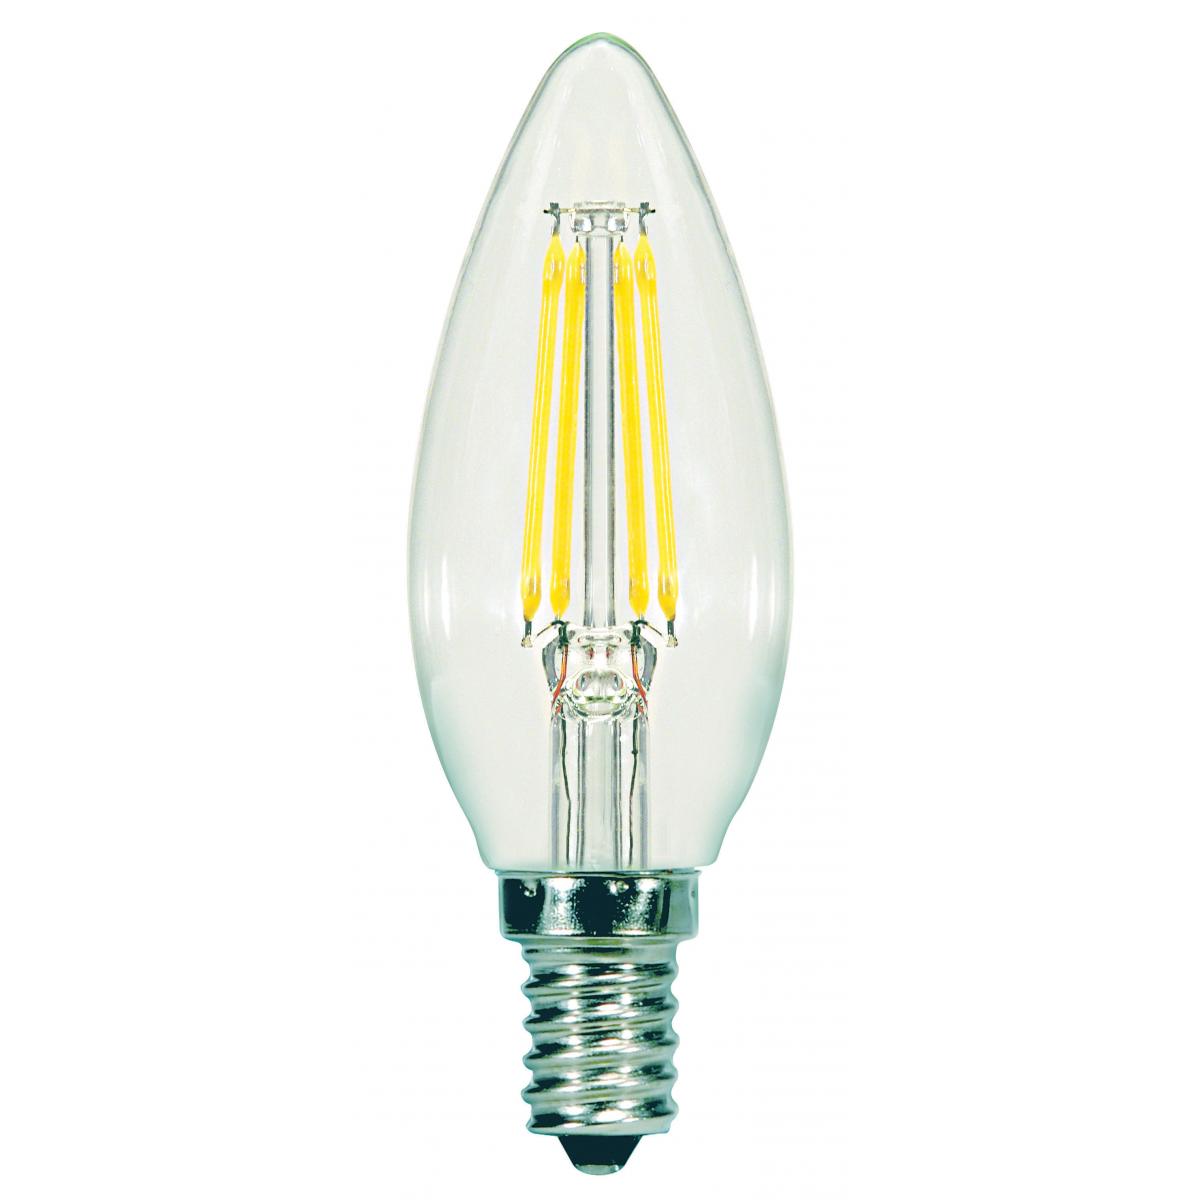 Replacement for Satco S21706 5.5 Watt B11 LED Clear Candelabra base 2700K 500 Lumens 120 Volt 2-Card - NOW S21827